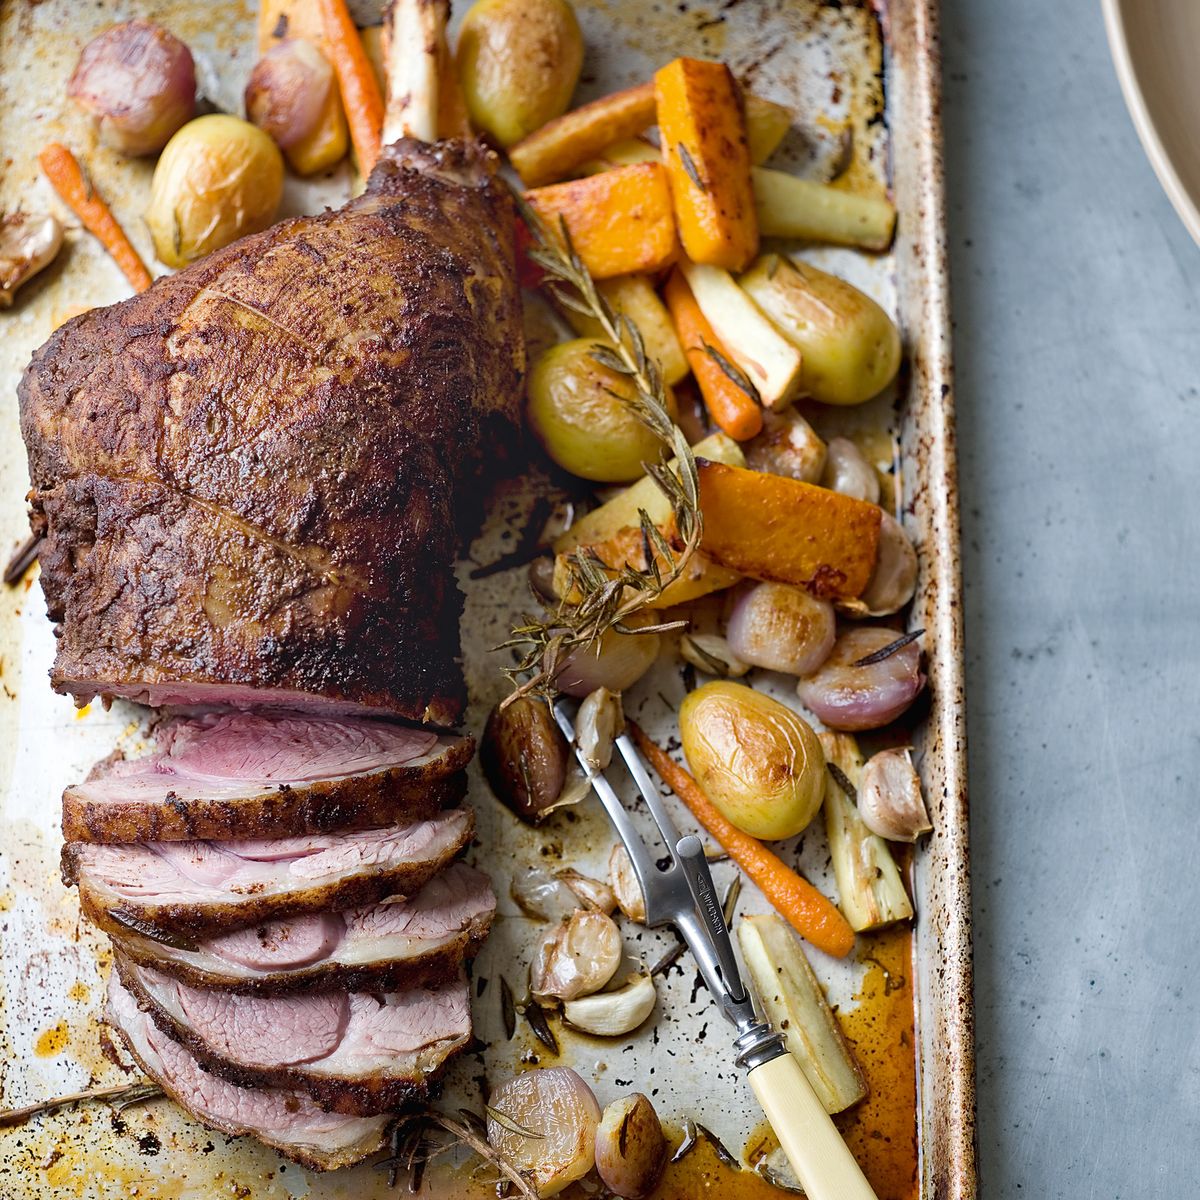 Upgrade your classic leg of lamb with this Baharat and vegetables recipe